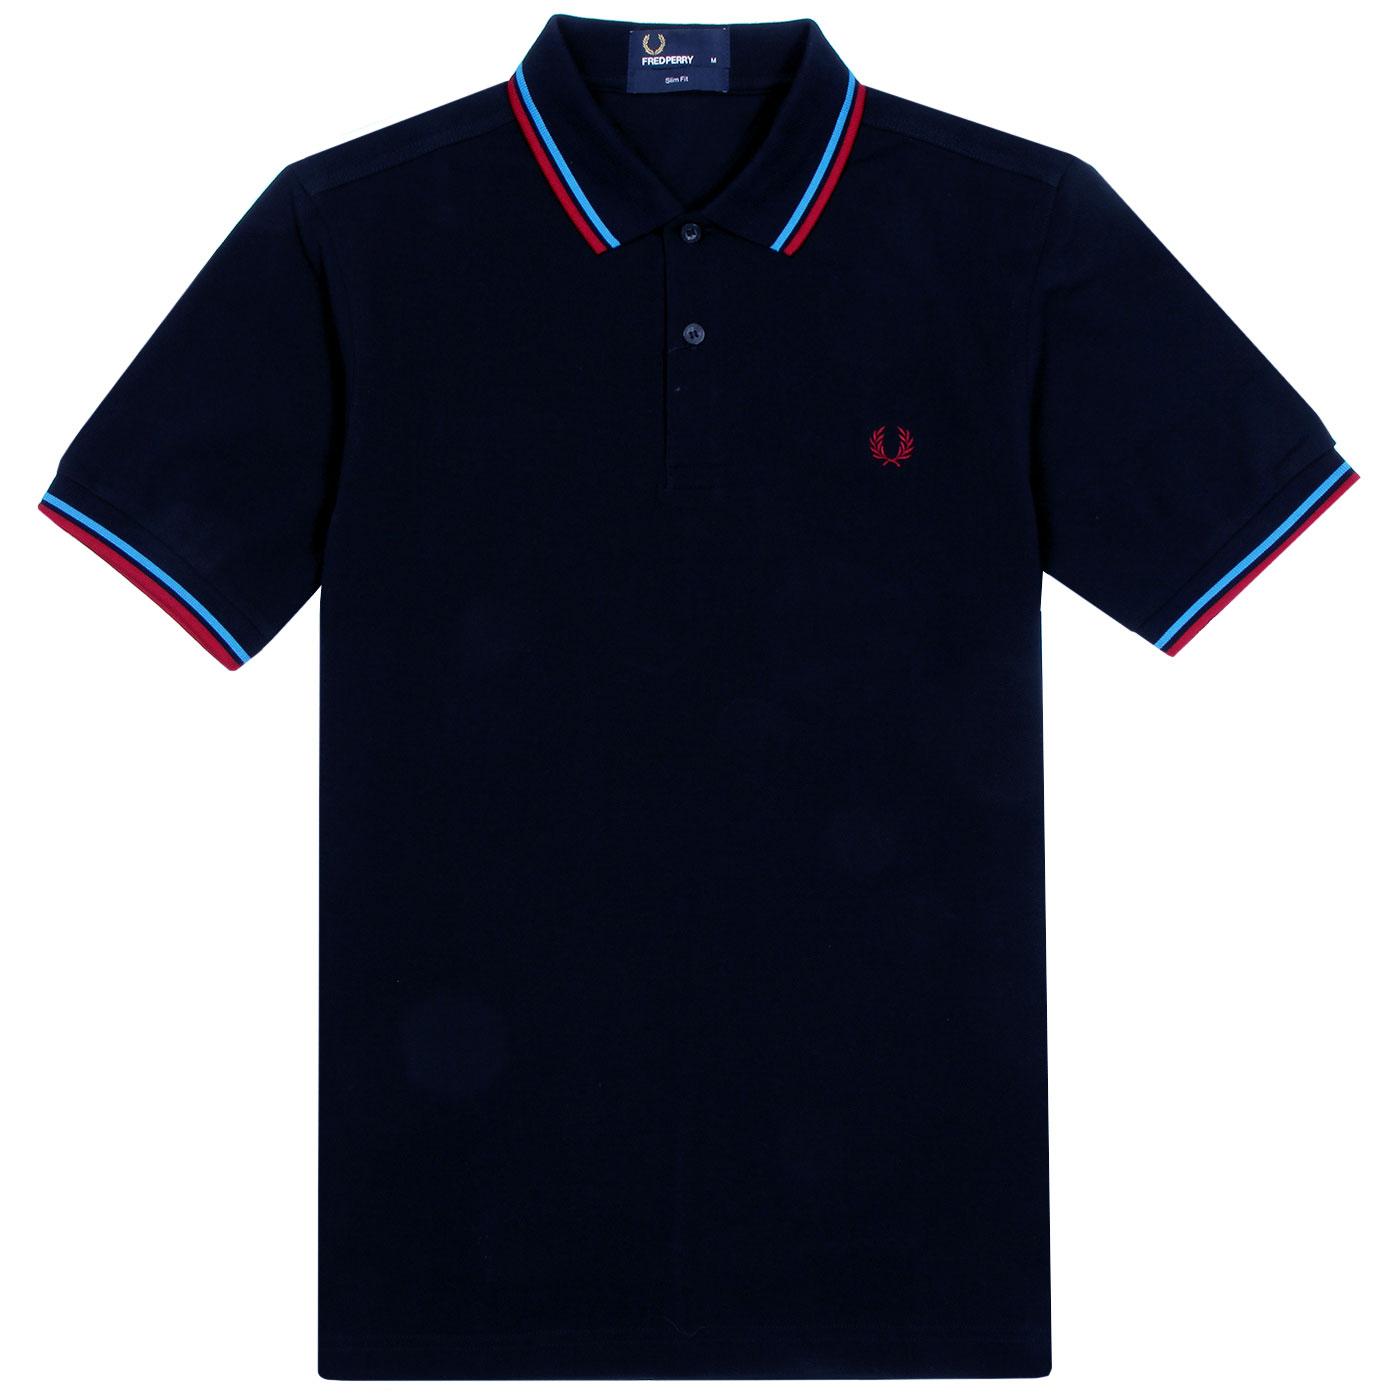 FRED PERRY M3600 Mod Twin Tipped Pique Polo Top in Navy